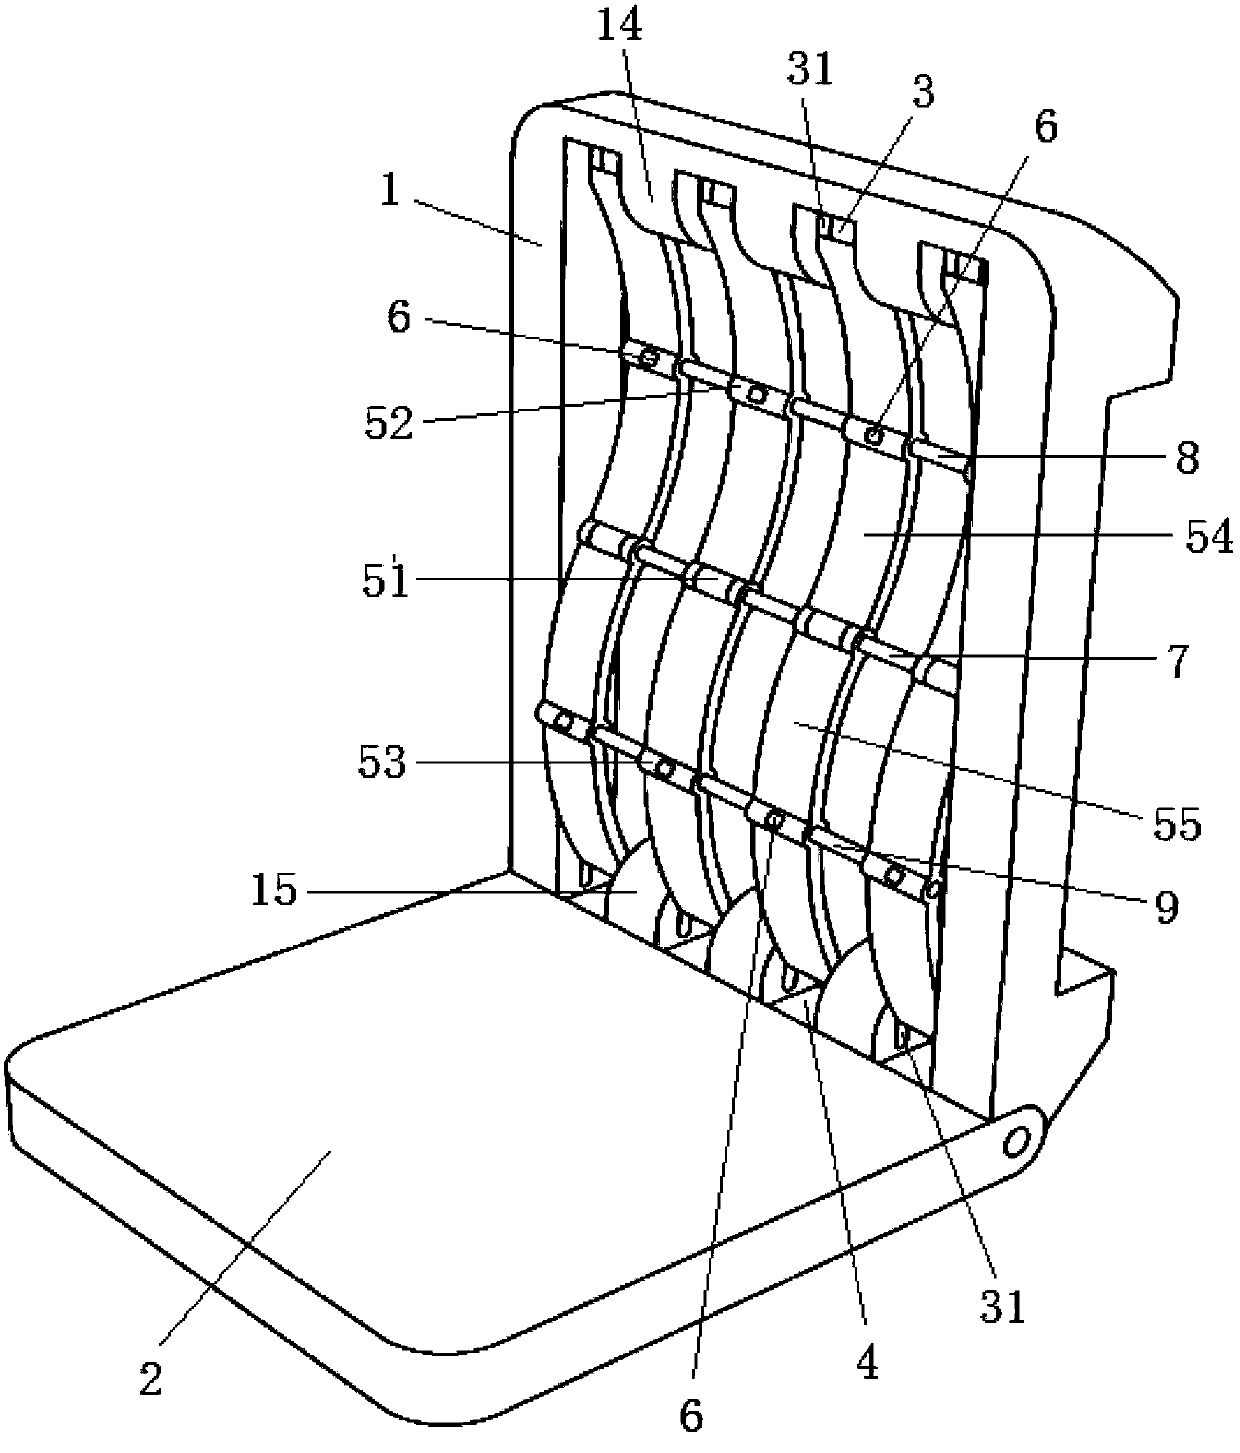 Chair back with function of fitting to human back through curve self-regulation